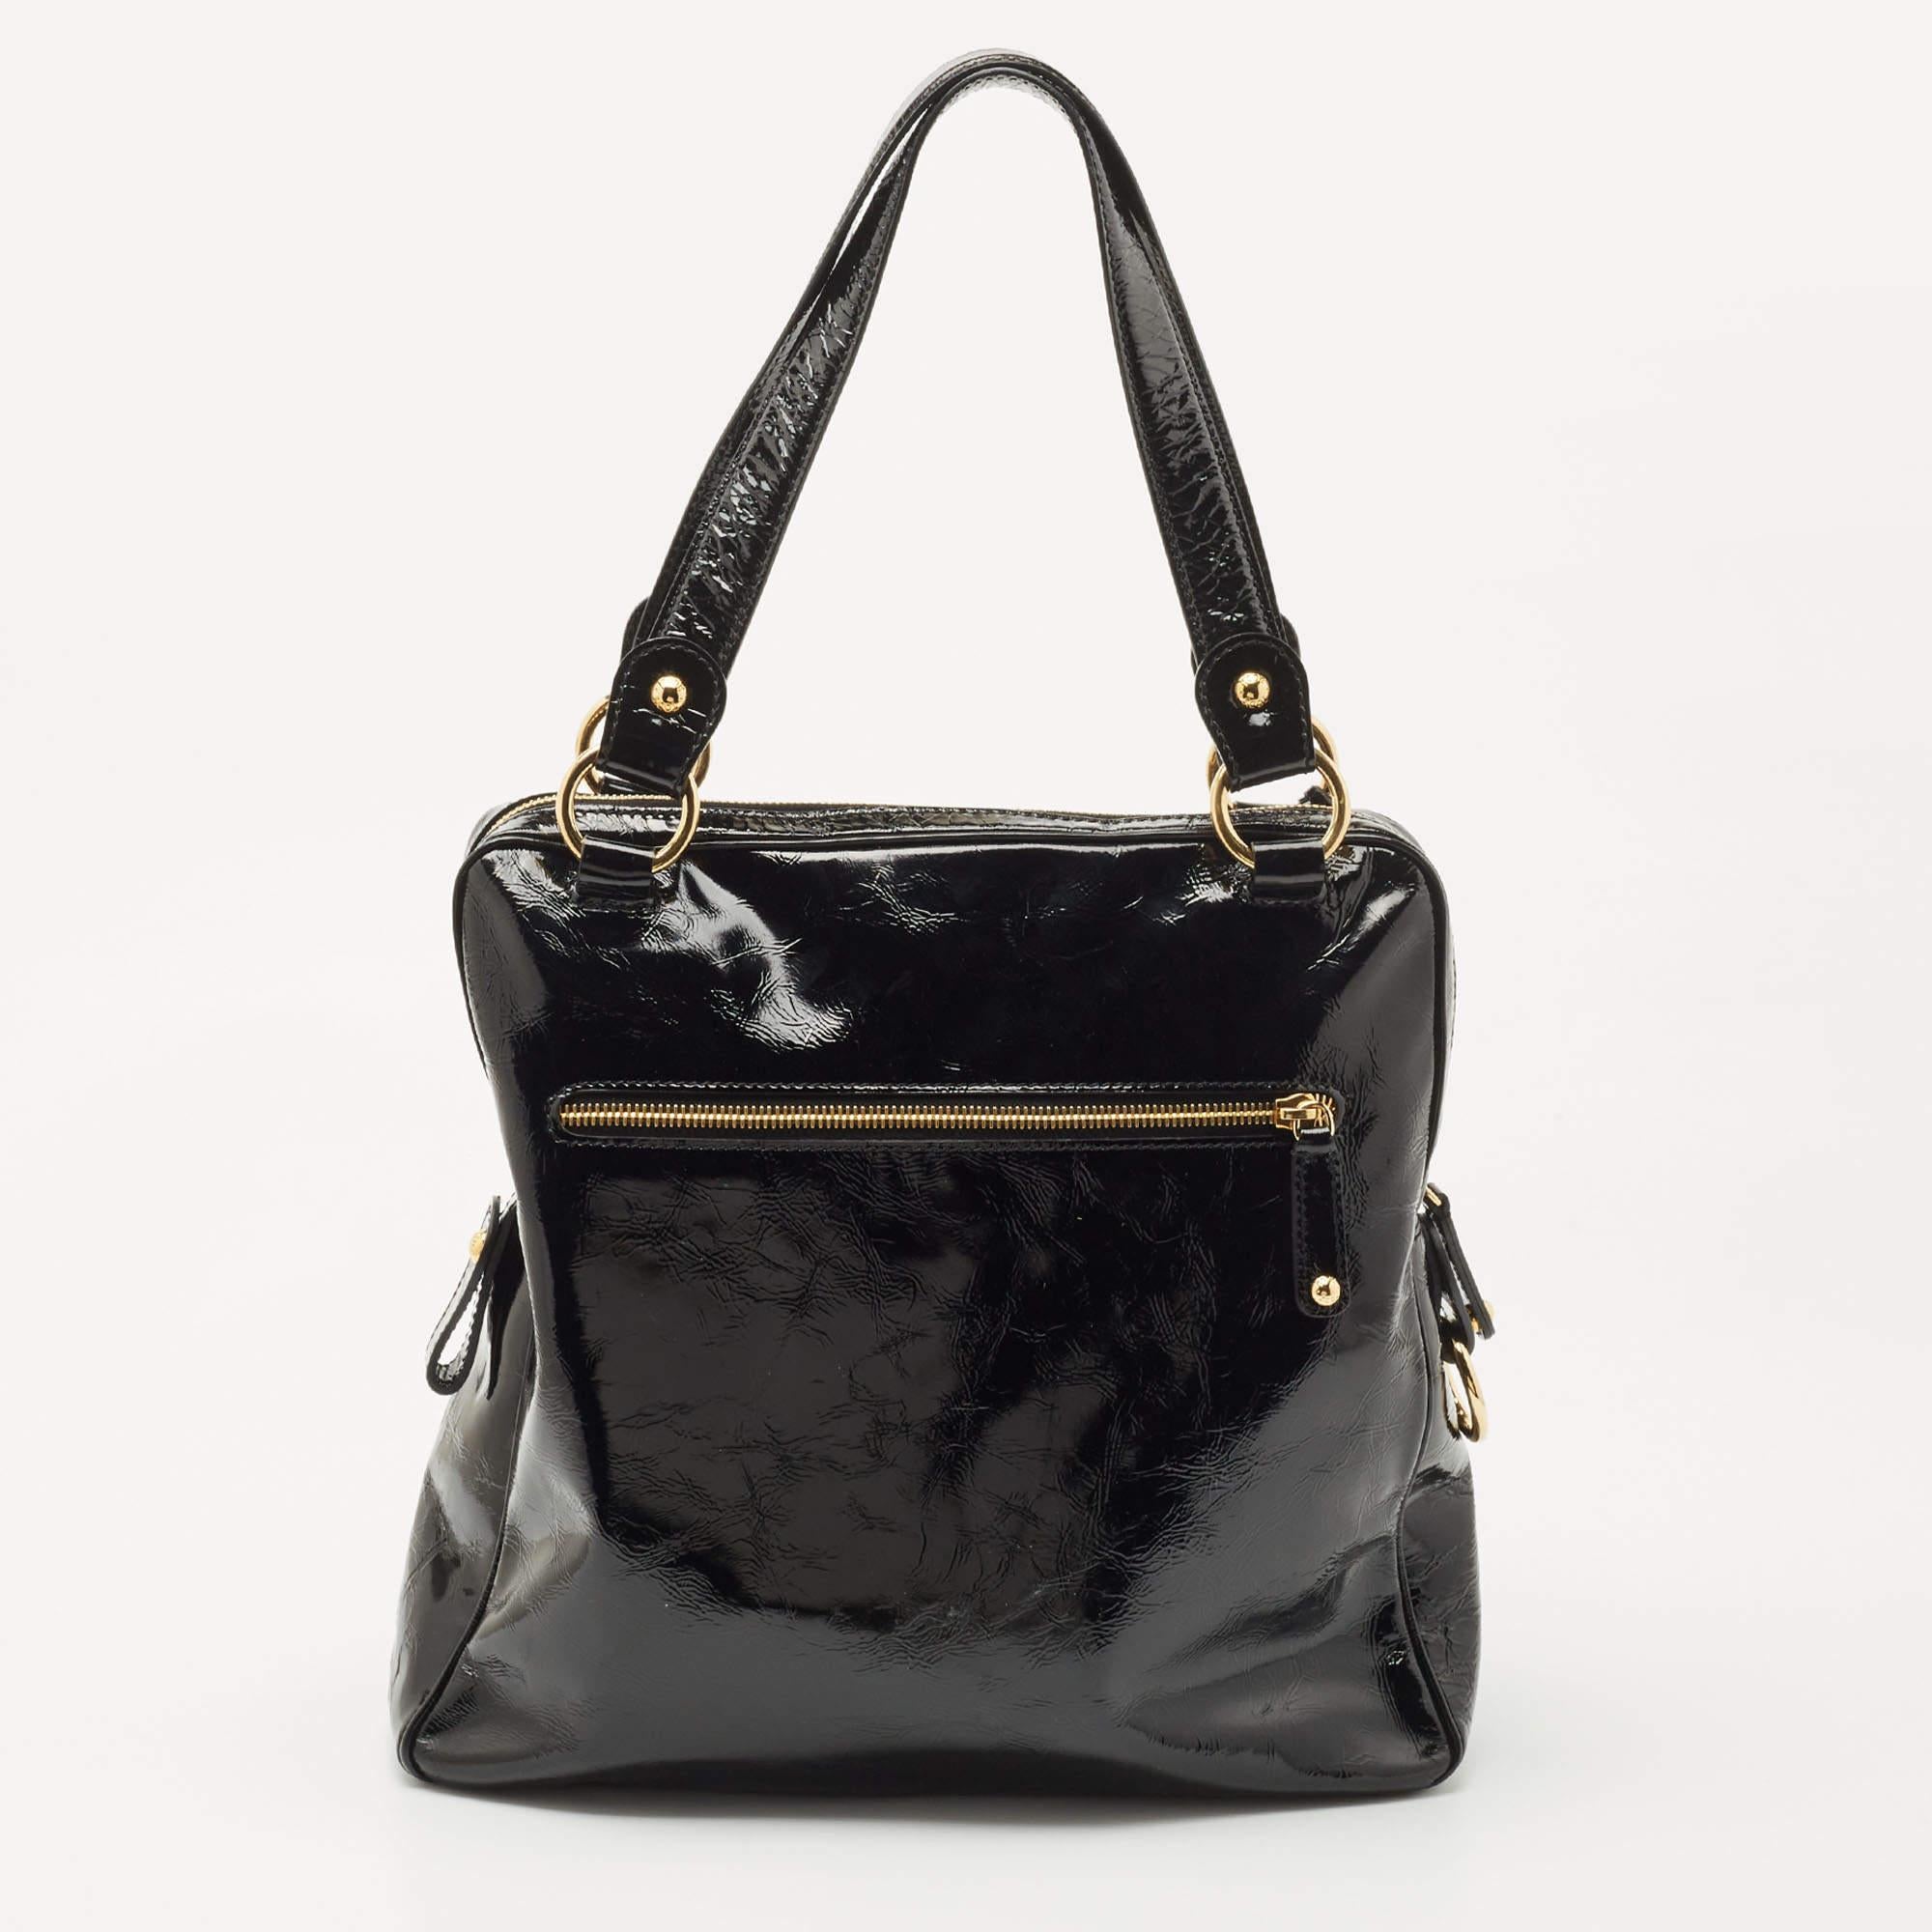 This satchel from Tod's is a creation meant to assist you with style and ease. It comes crafted from patent leather and is detailed with multiple pockets on the front. Two handles are provided for you to carry it, and a spacious interior is to house